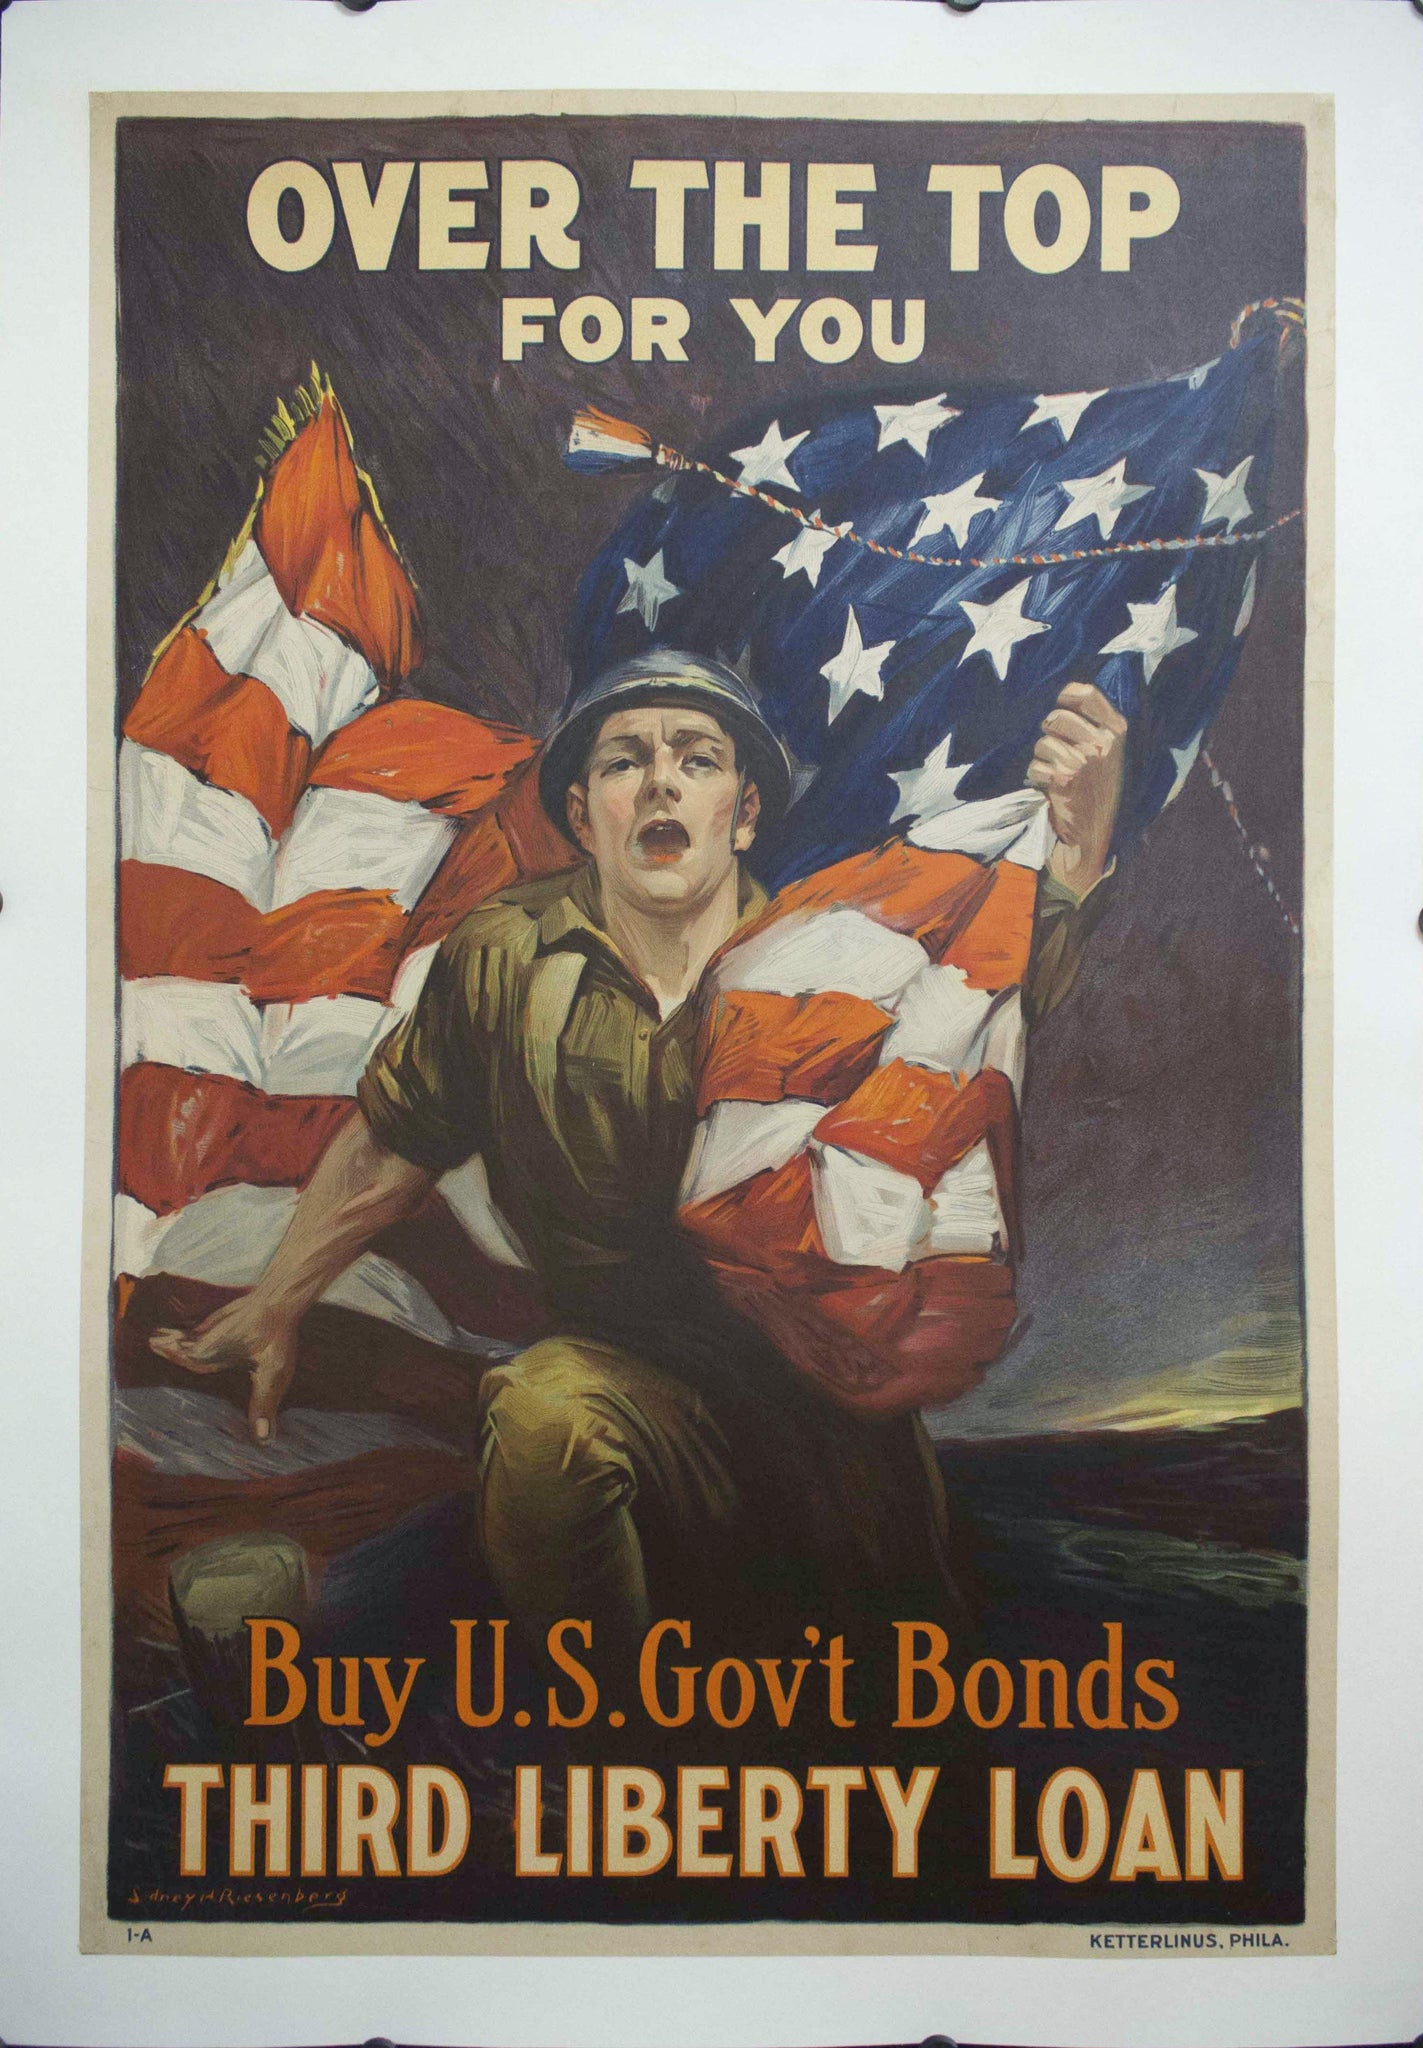 c. 1918 Over the Top for You | Buy US Gov't Bonds Third Liberty Loan - Golden Age Posters